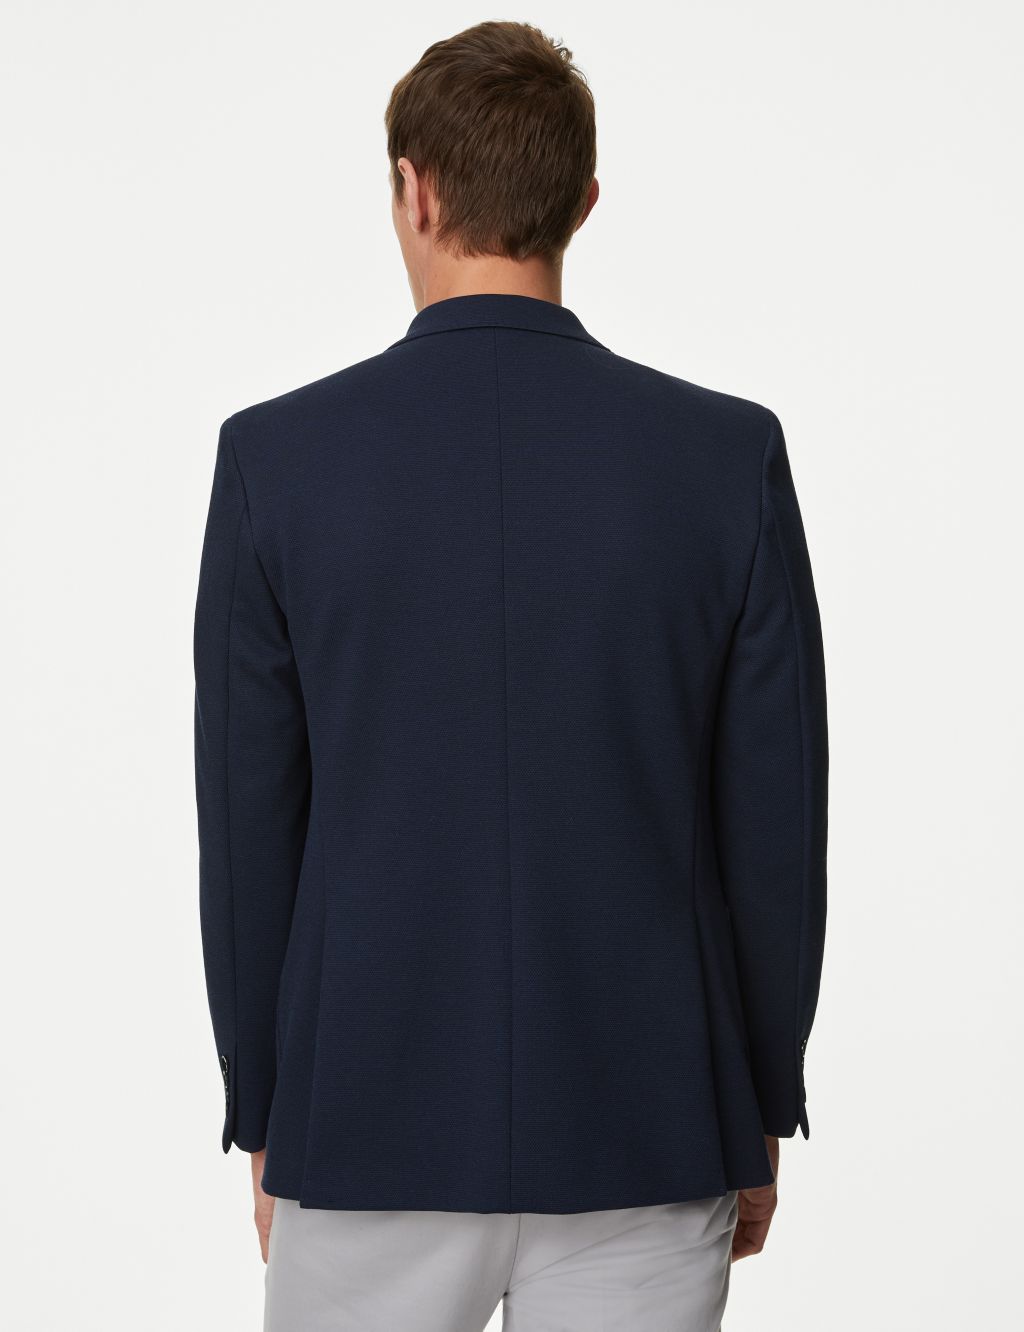 Textured Jersey Jacket with Stretch 4 of 7